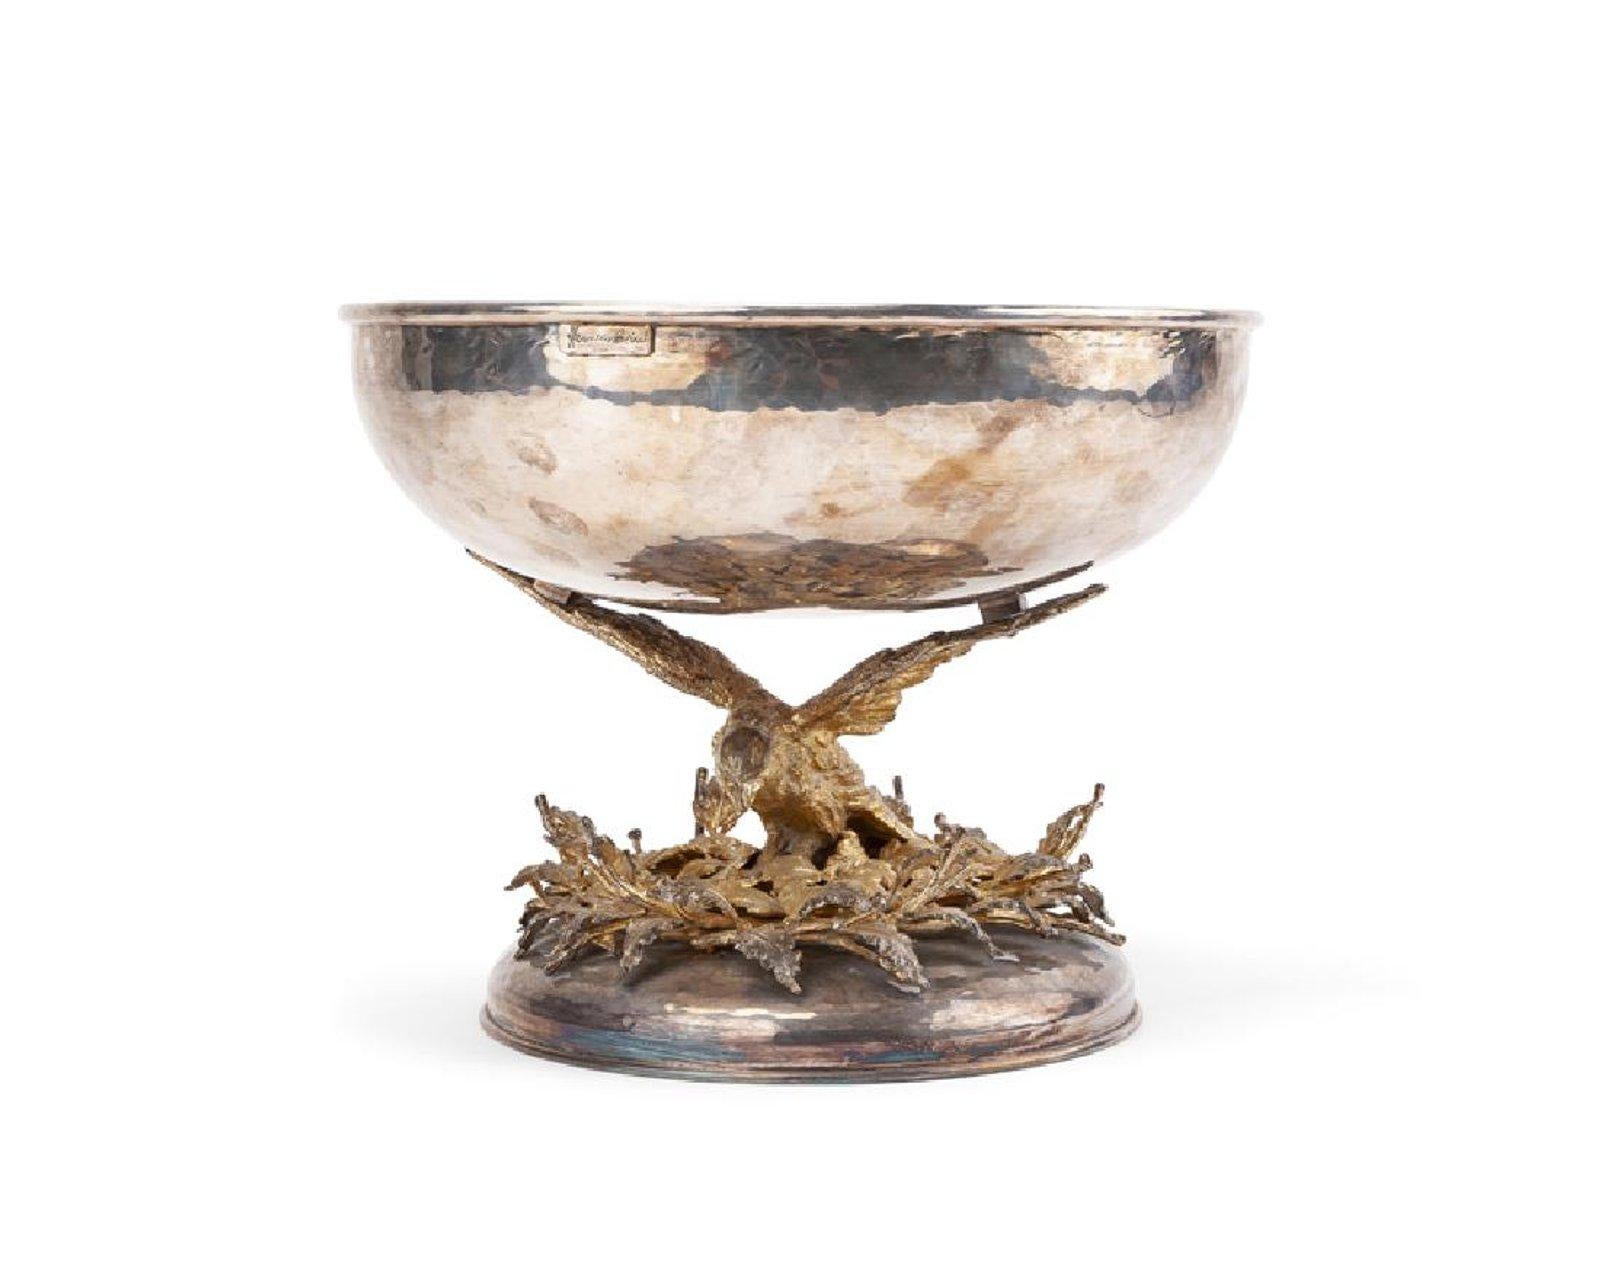 Third quarter of the 20th century
Signed to rim: Franco Lapini / Made in Italy
The silver-plated hammered bowl resting on a gold plated bird's outstretched wings over a nest of leaves on an domed base
Measures: 10.75